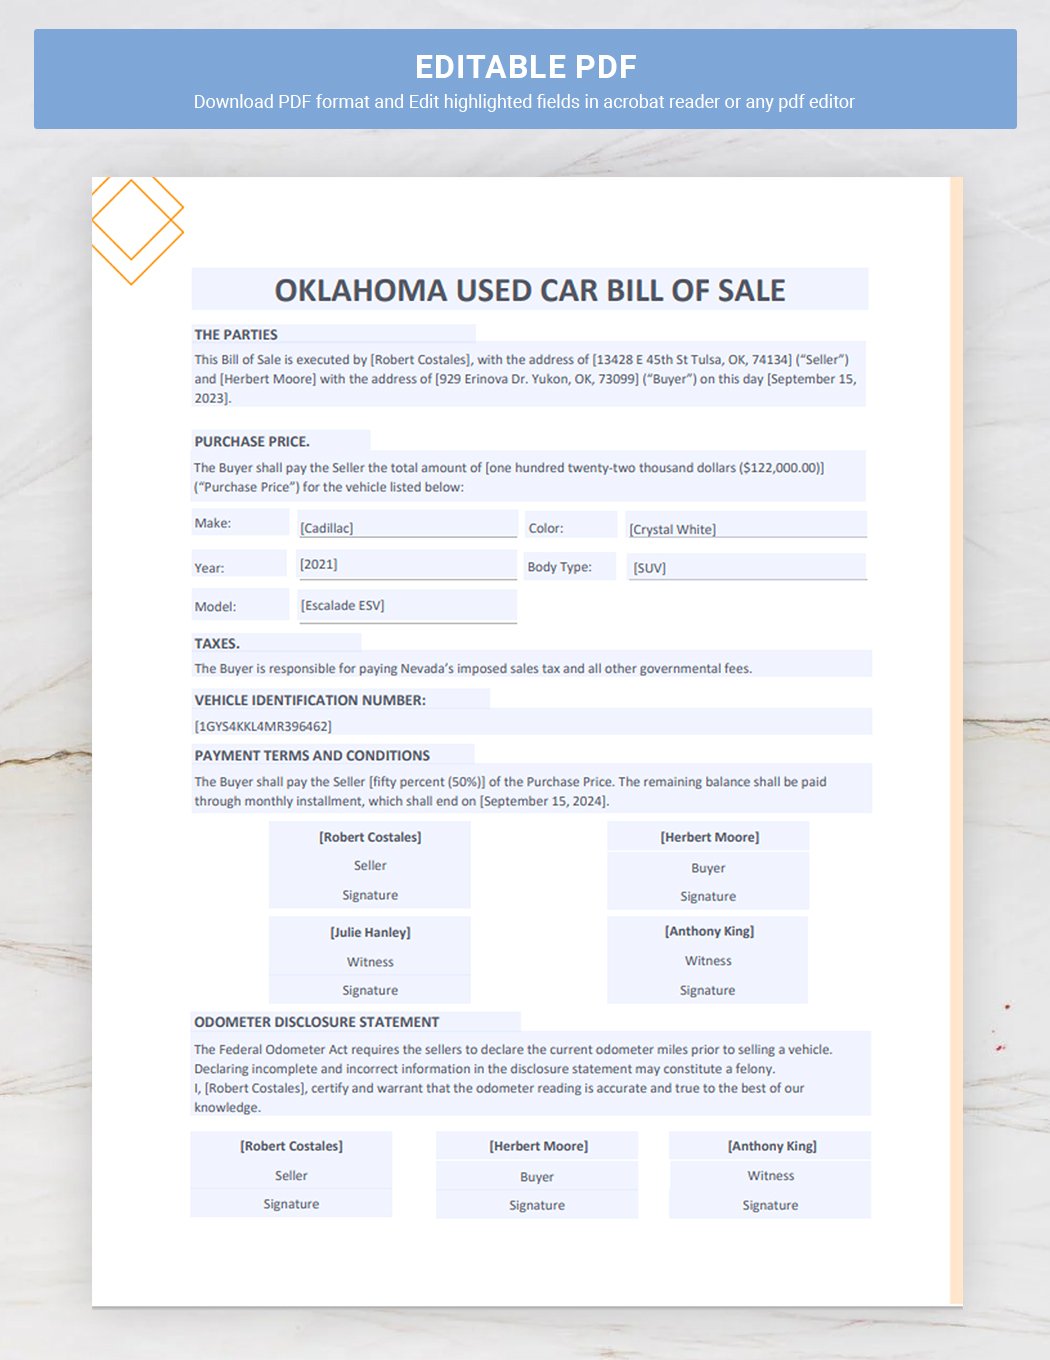 Oklahoma Used Car Bill of Sale Template Download in Word, Google Docs